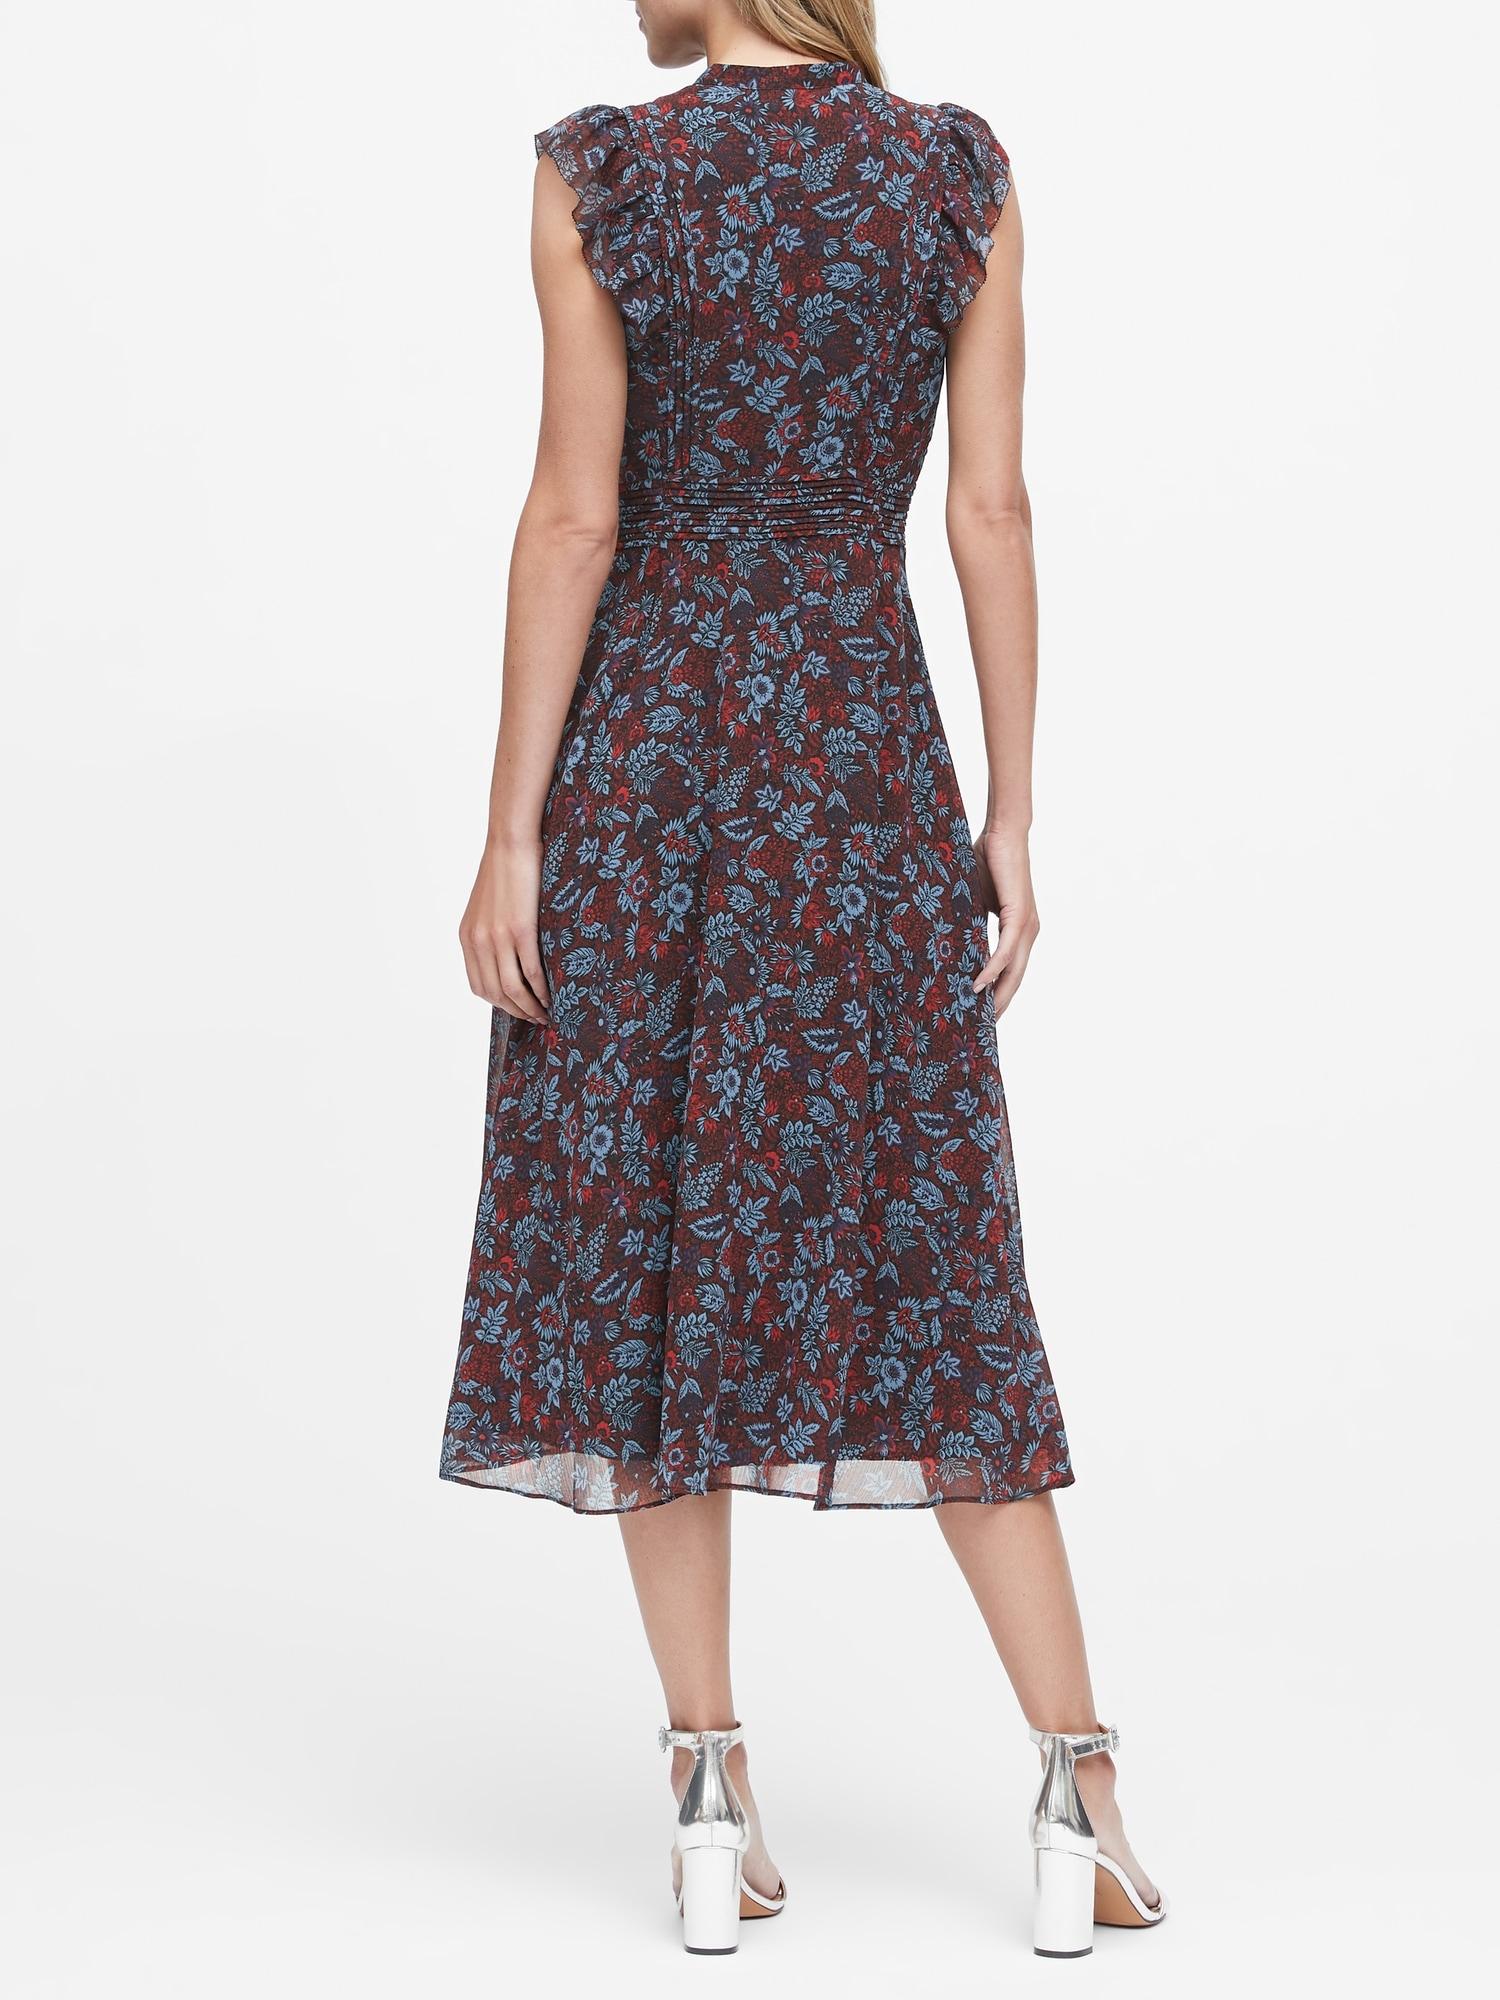 Banana Republic Lace Petite Floral Fit-and-flare Dress in Blue - Lyst